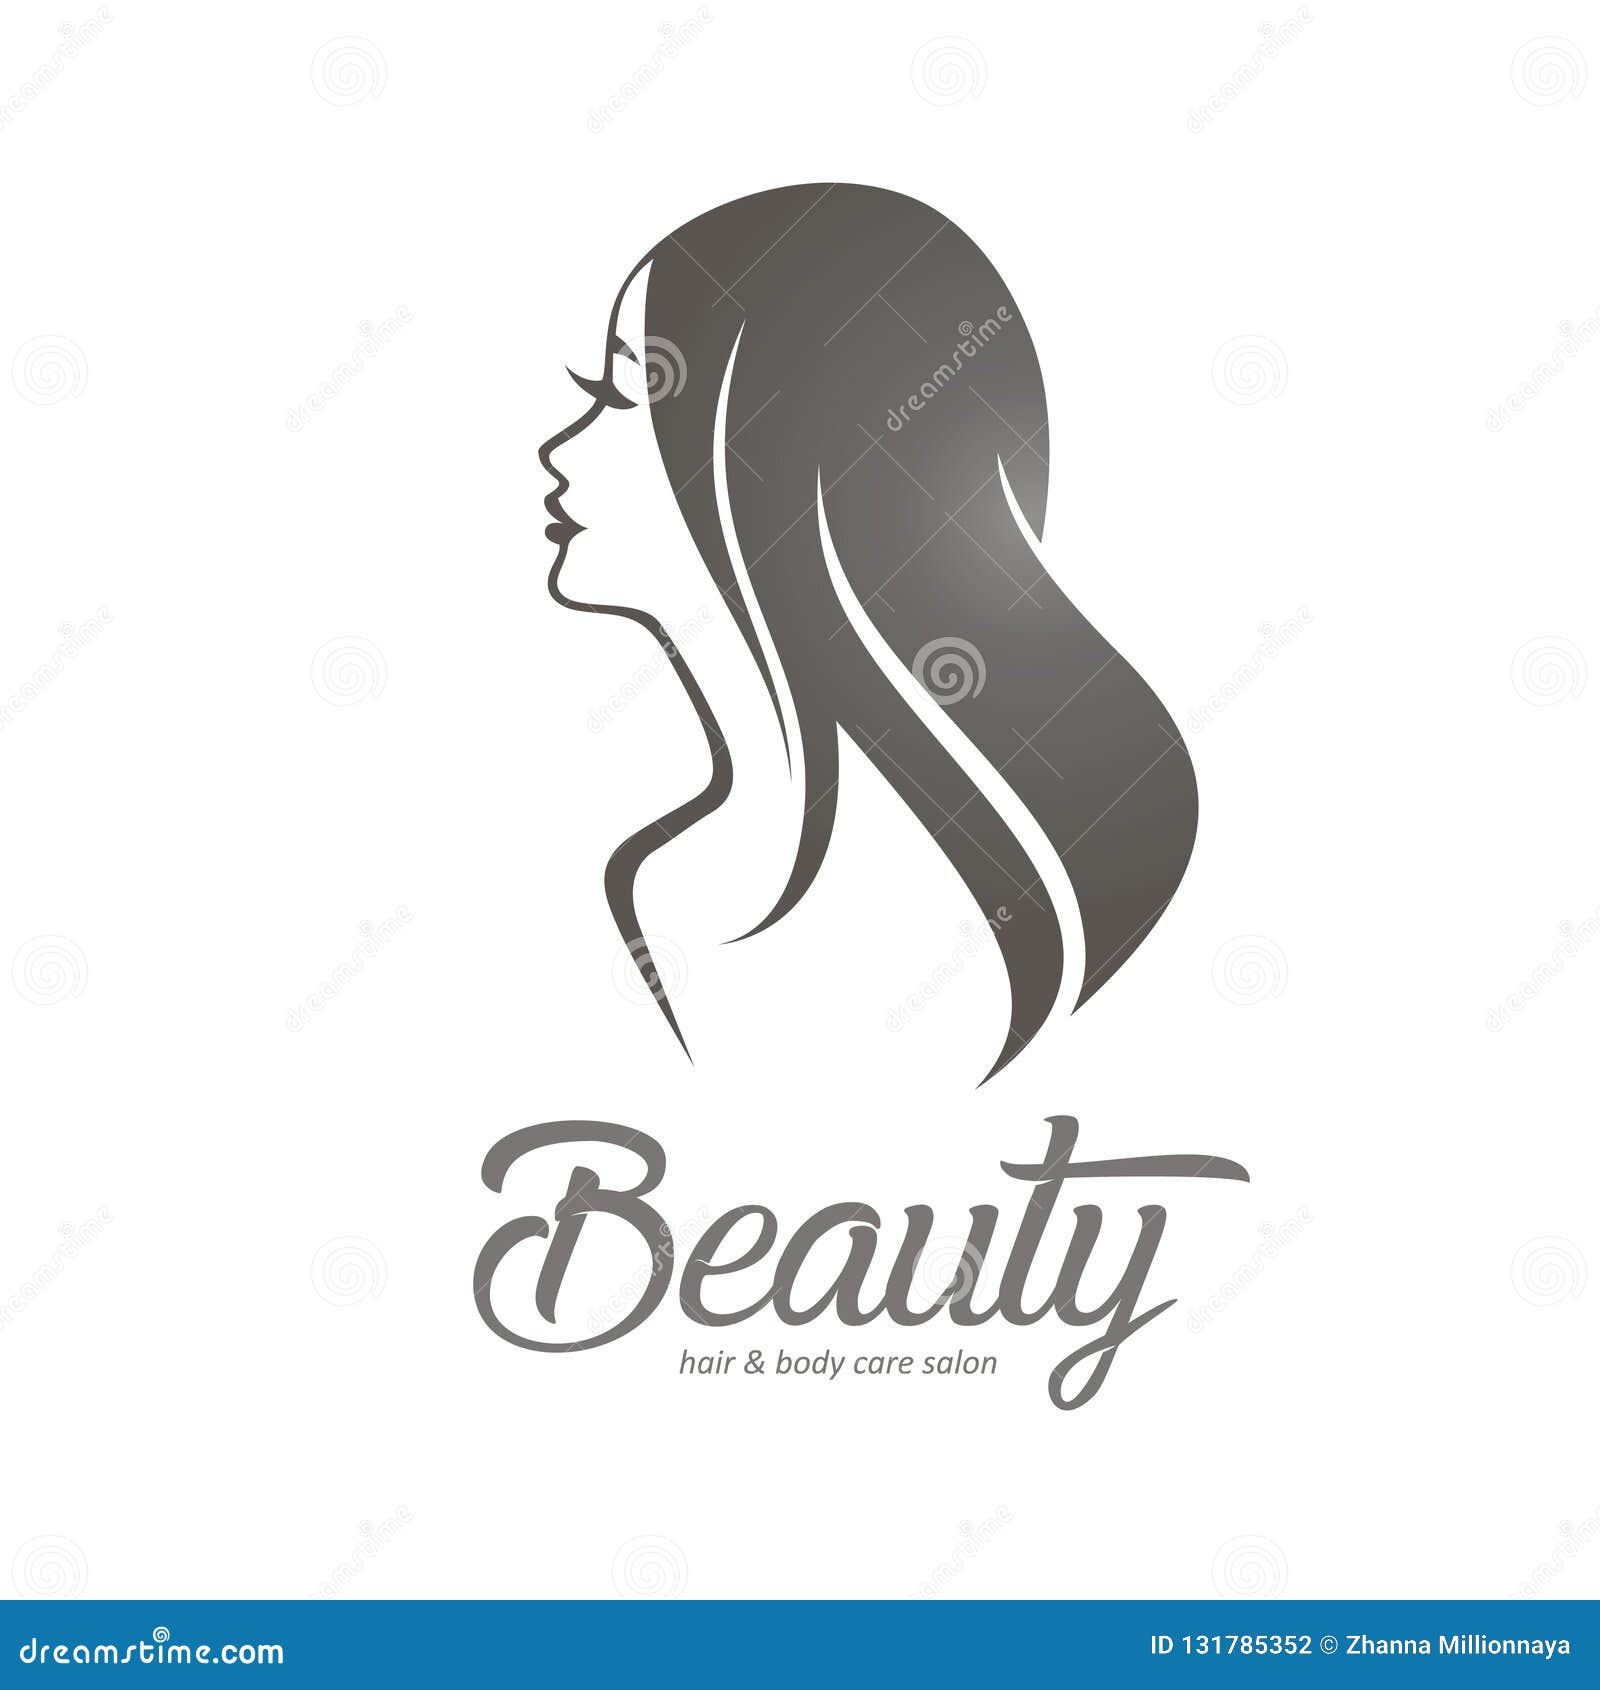 womans hair style stylized sillhouette